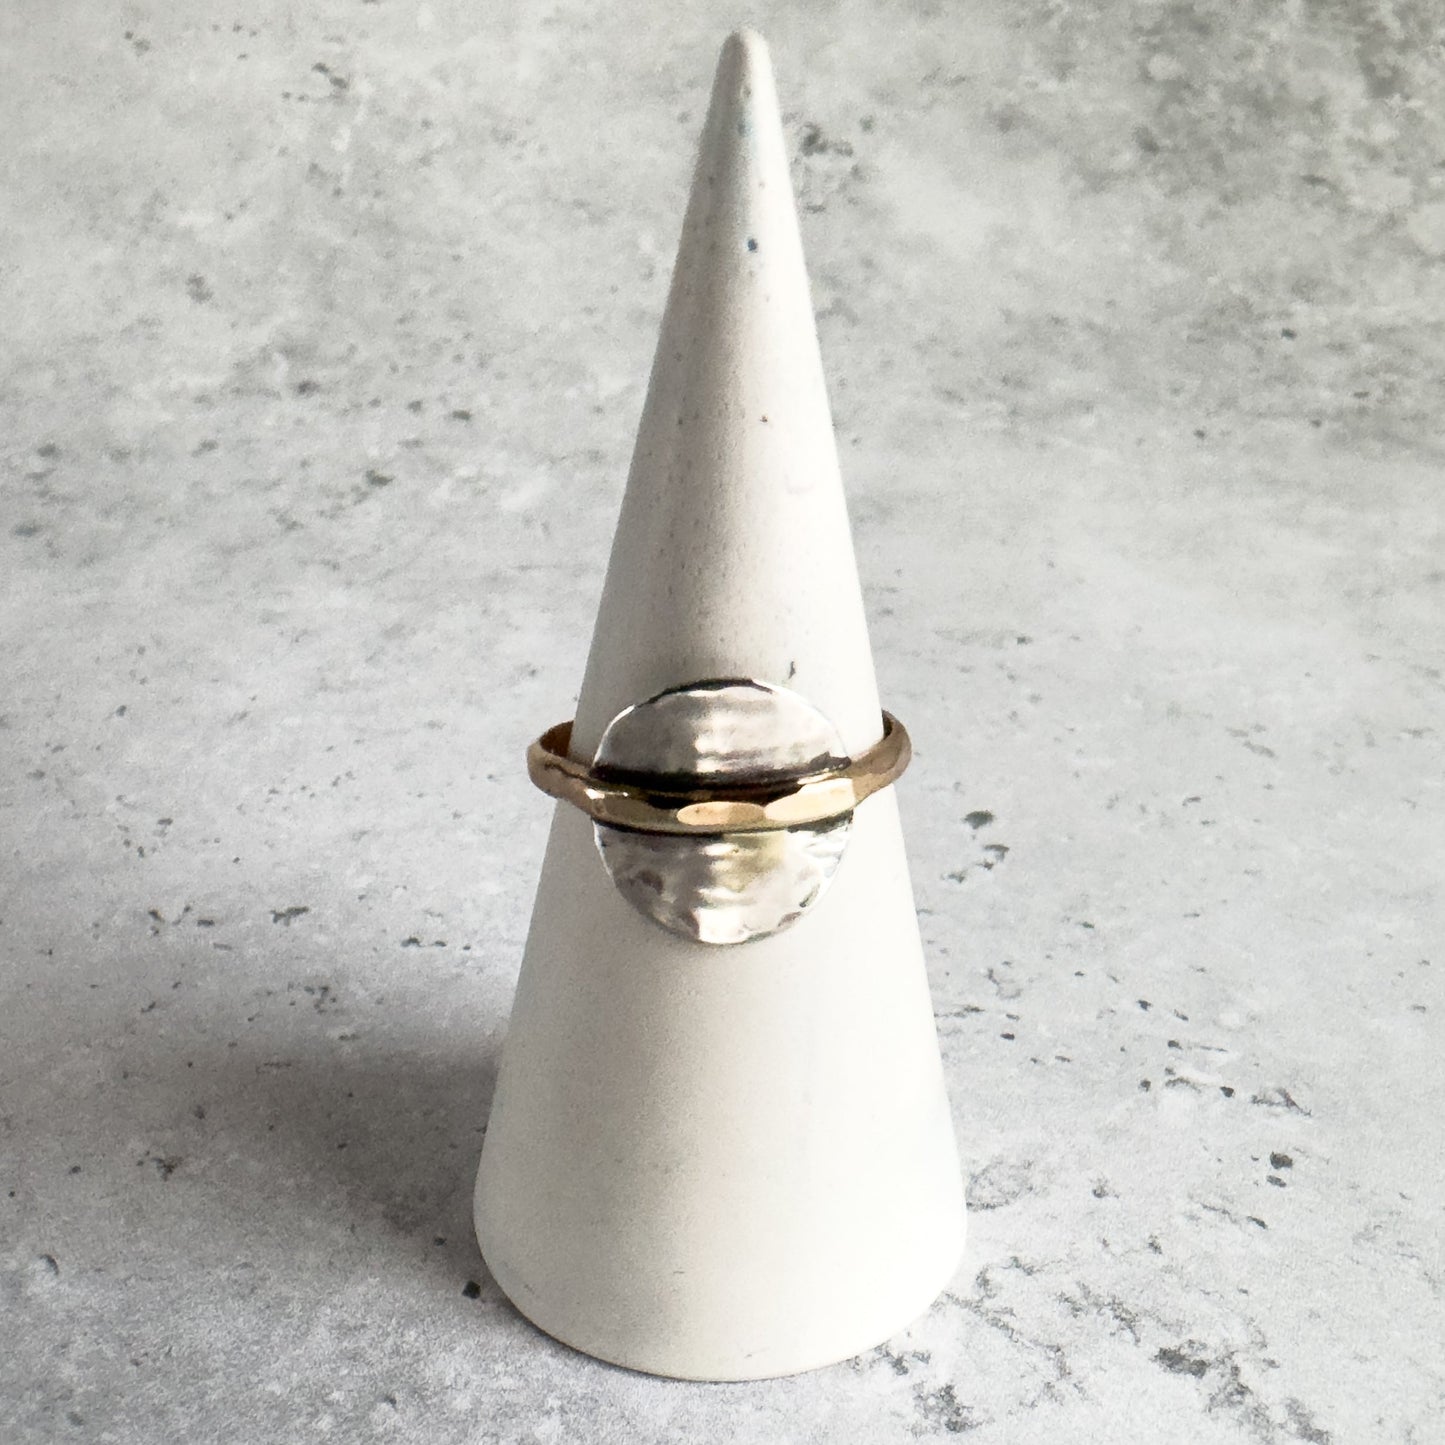 Embrace Ring - Made to order